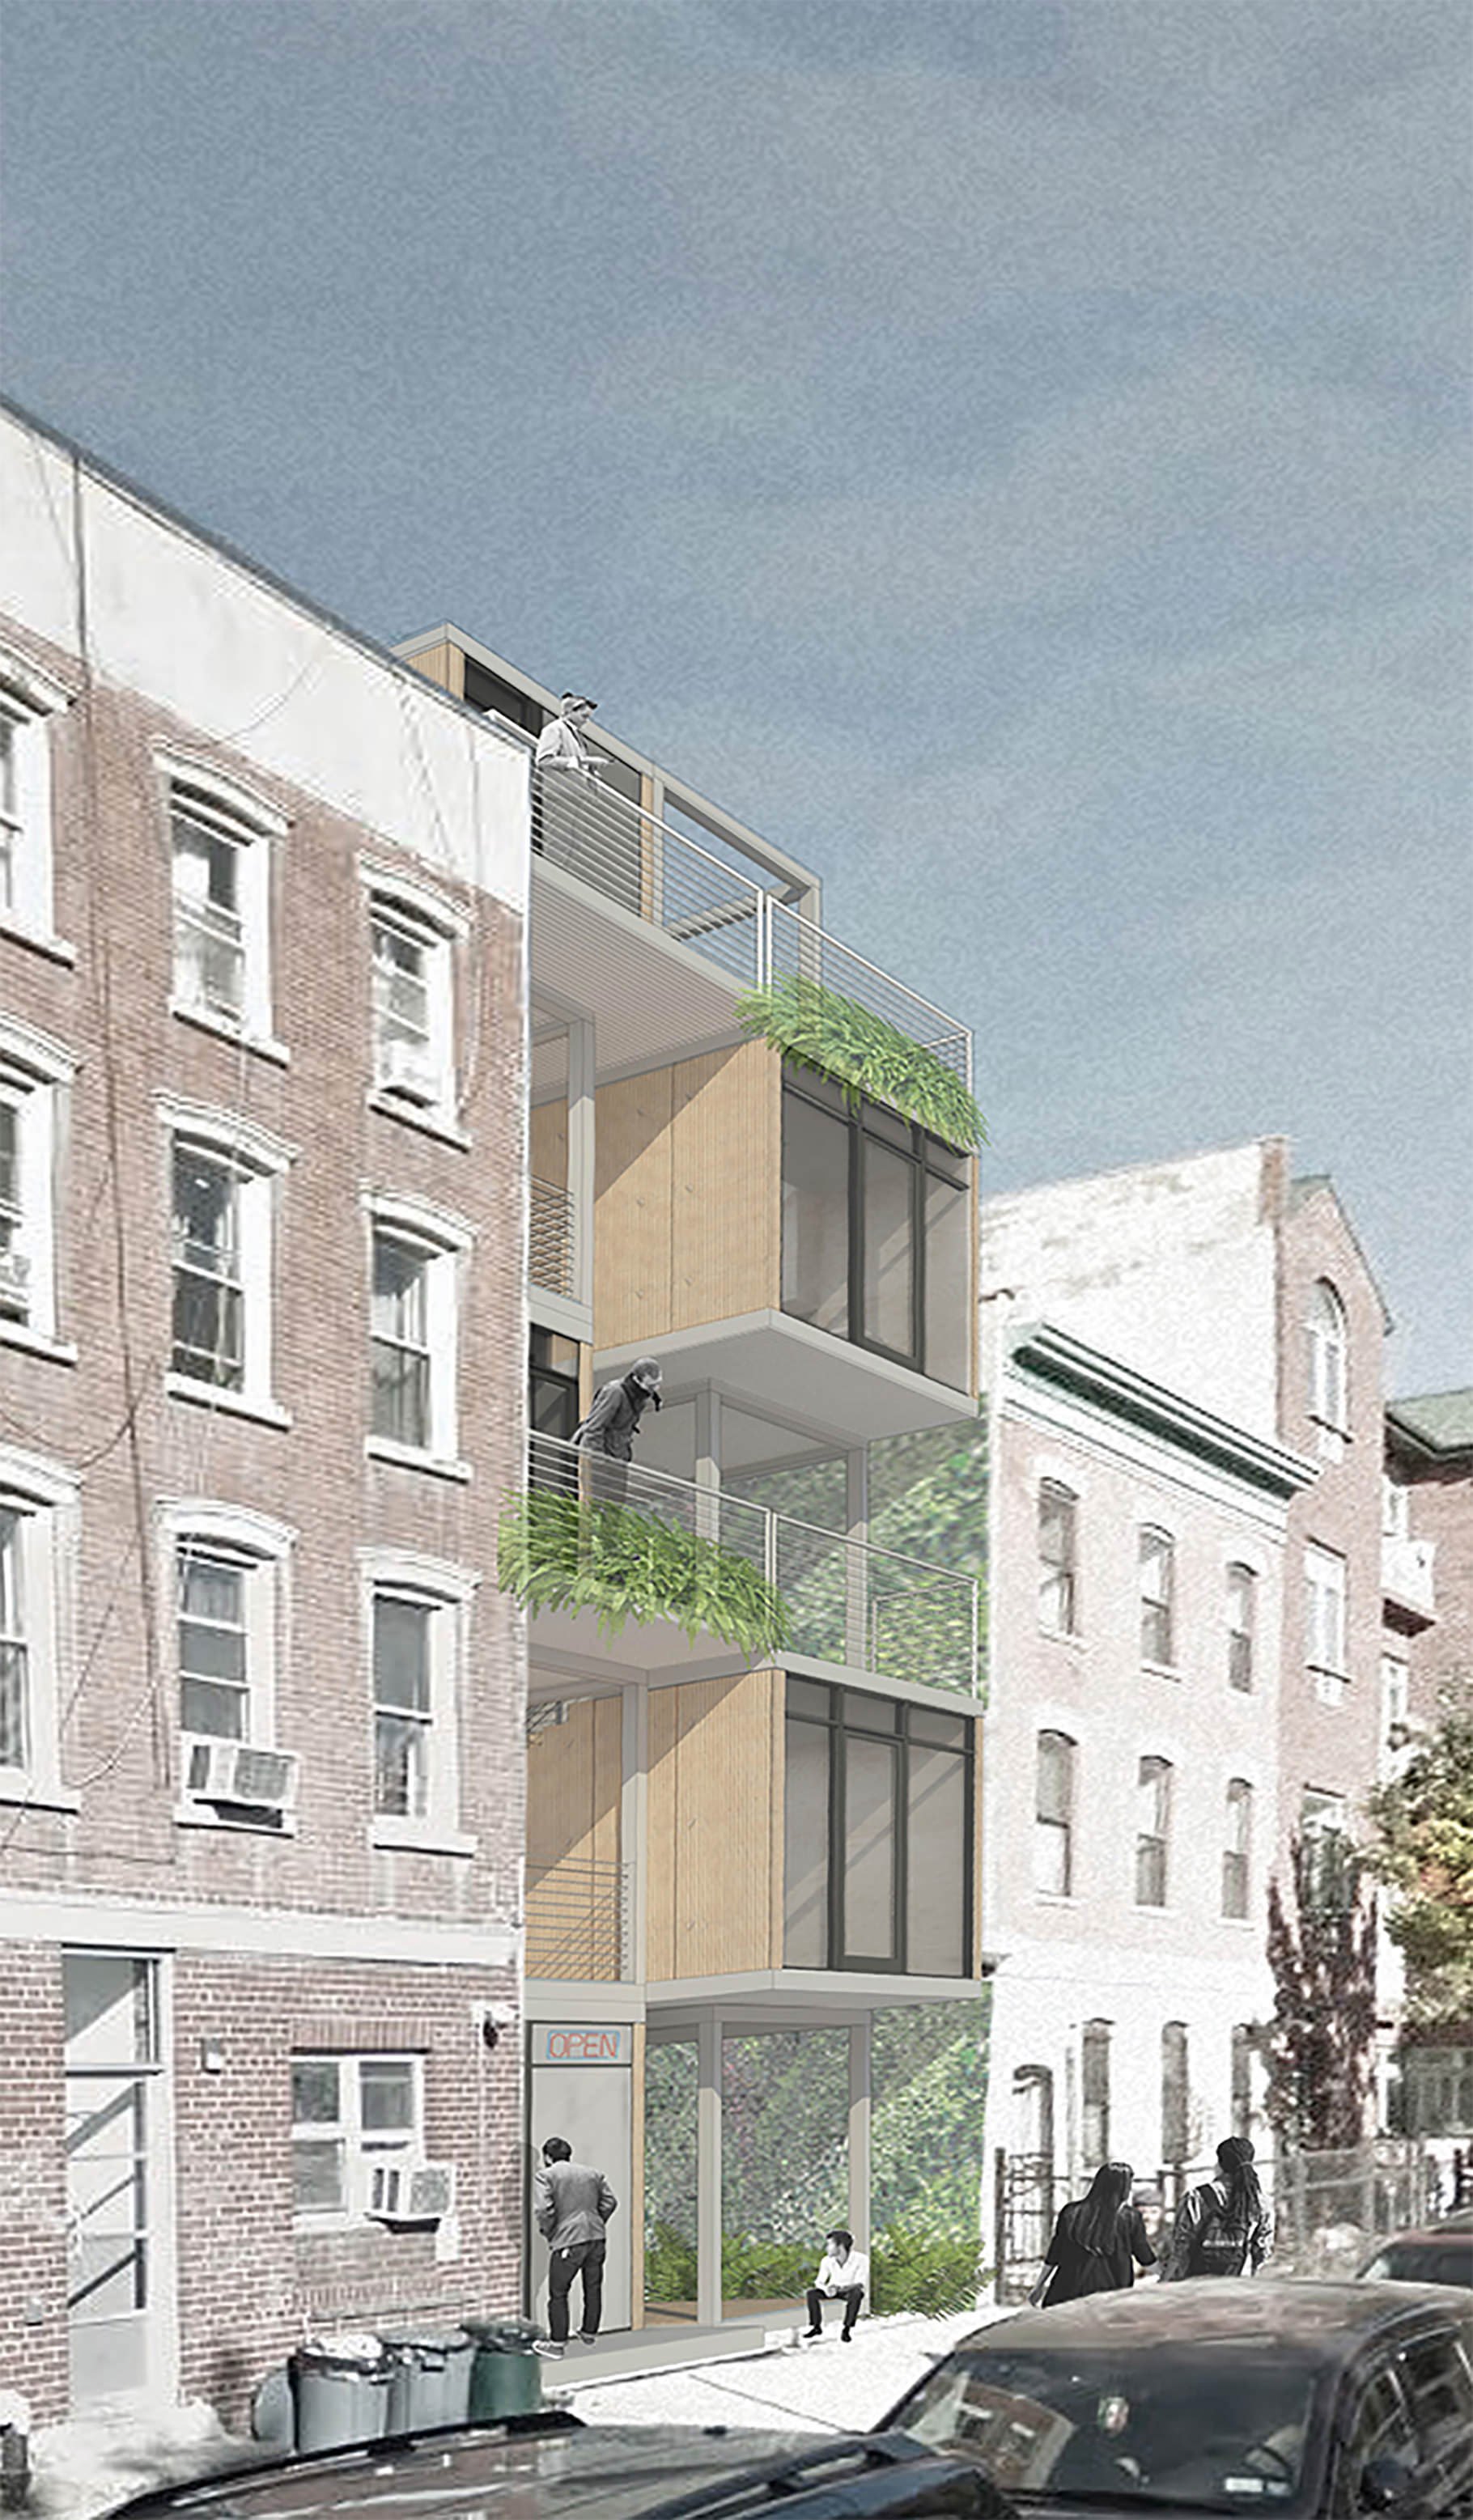 NYC Architect Architecture Affordable Housing Modular Design Urban Green Space Balconies Adaptable Residential Apartments Rendering